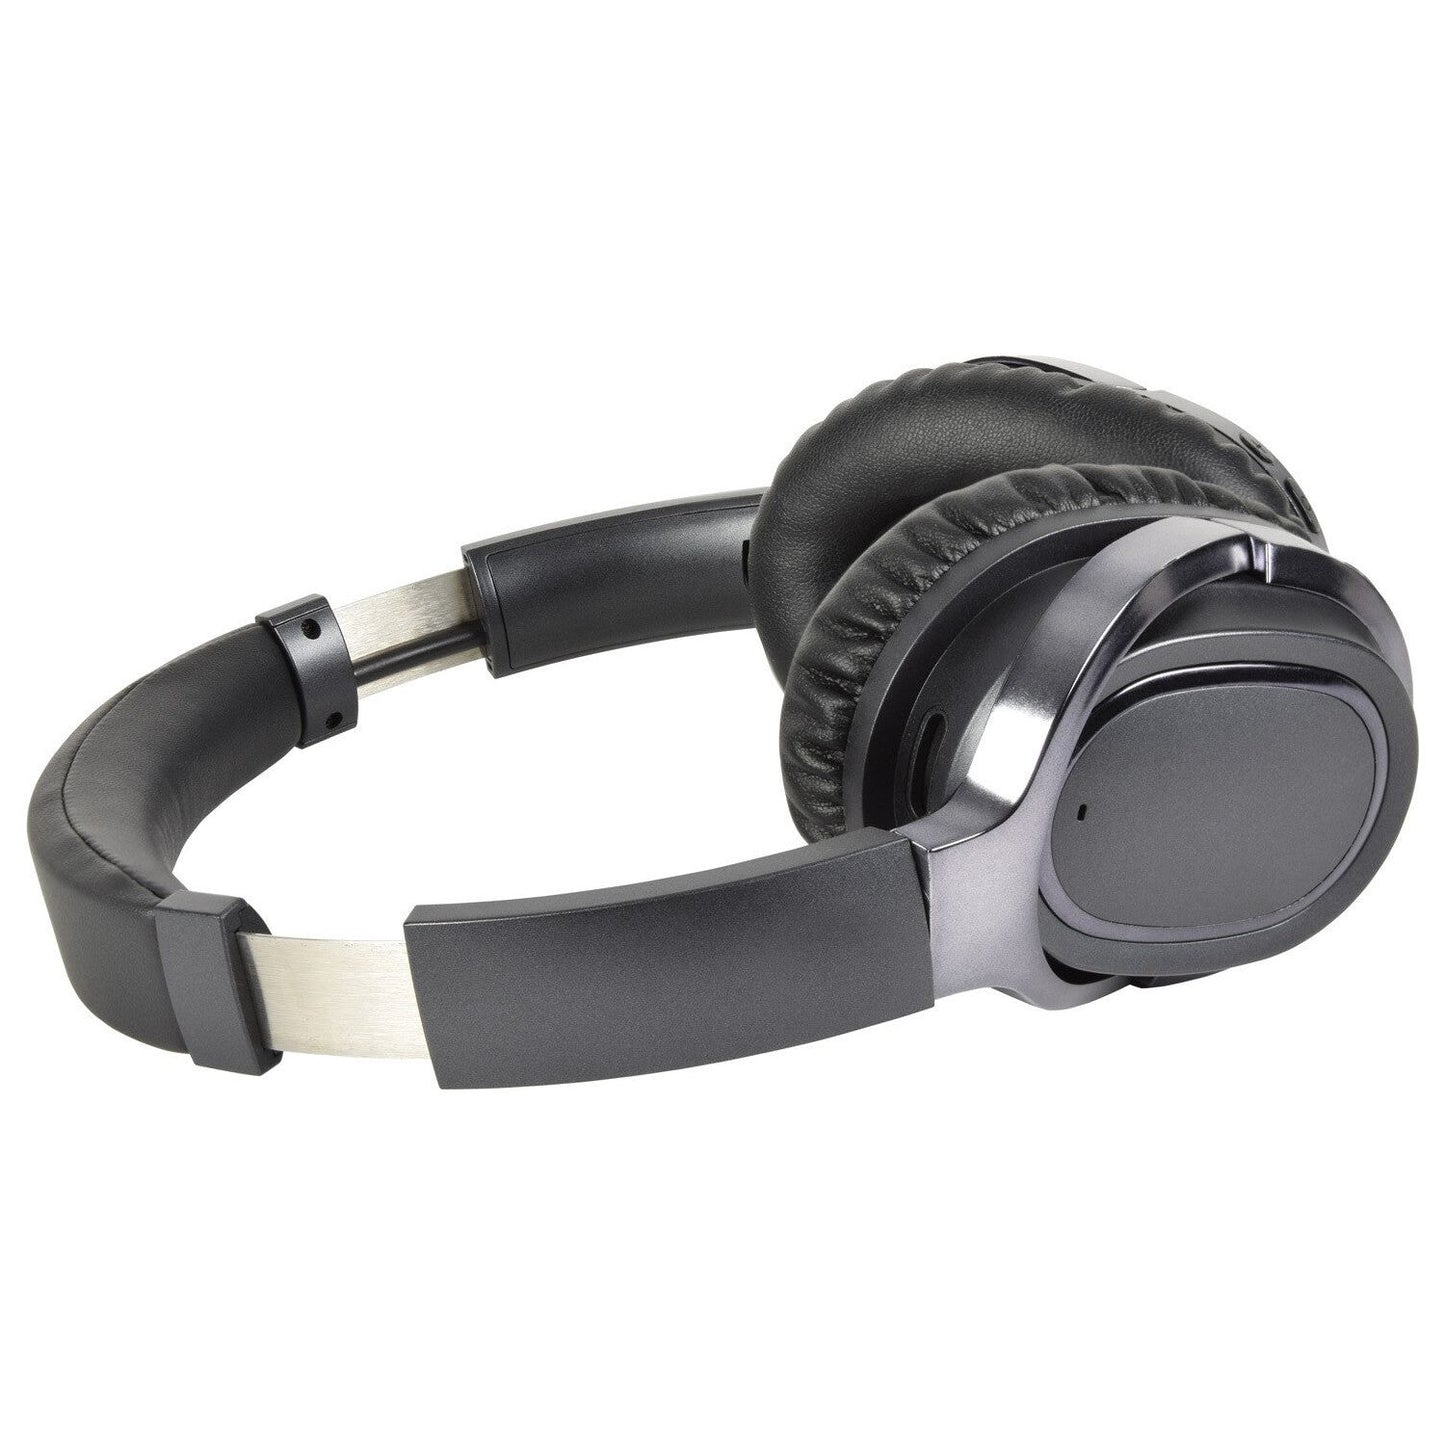 Thinklabs Compatible Noise Cancelling Bluetooth Headphones (Requires BT Transmitter)